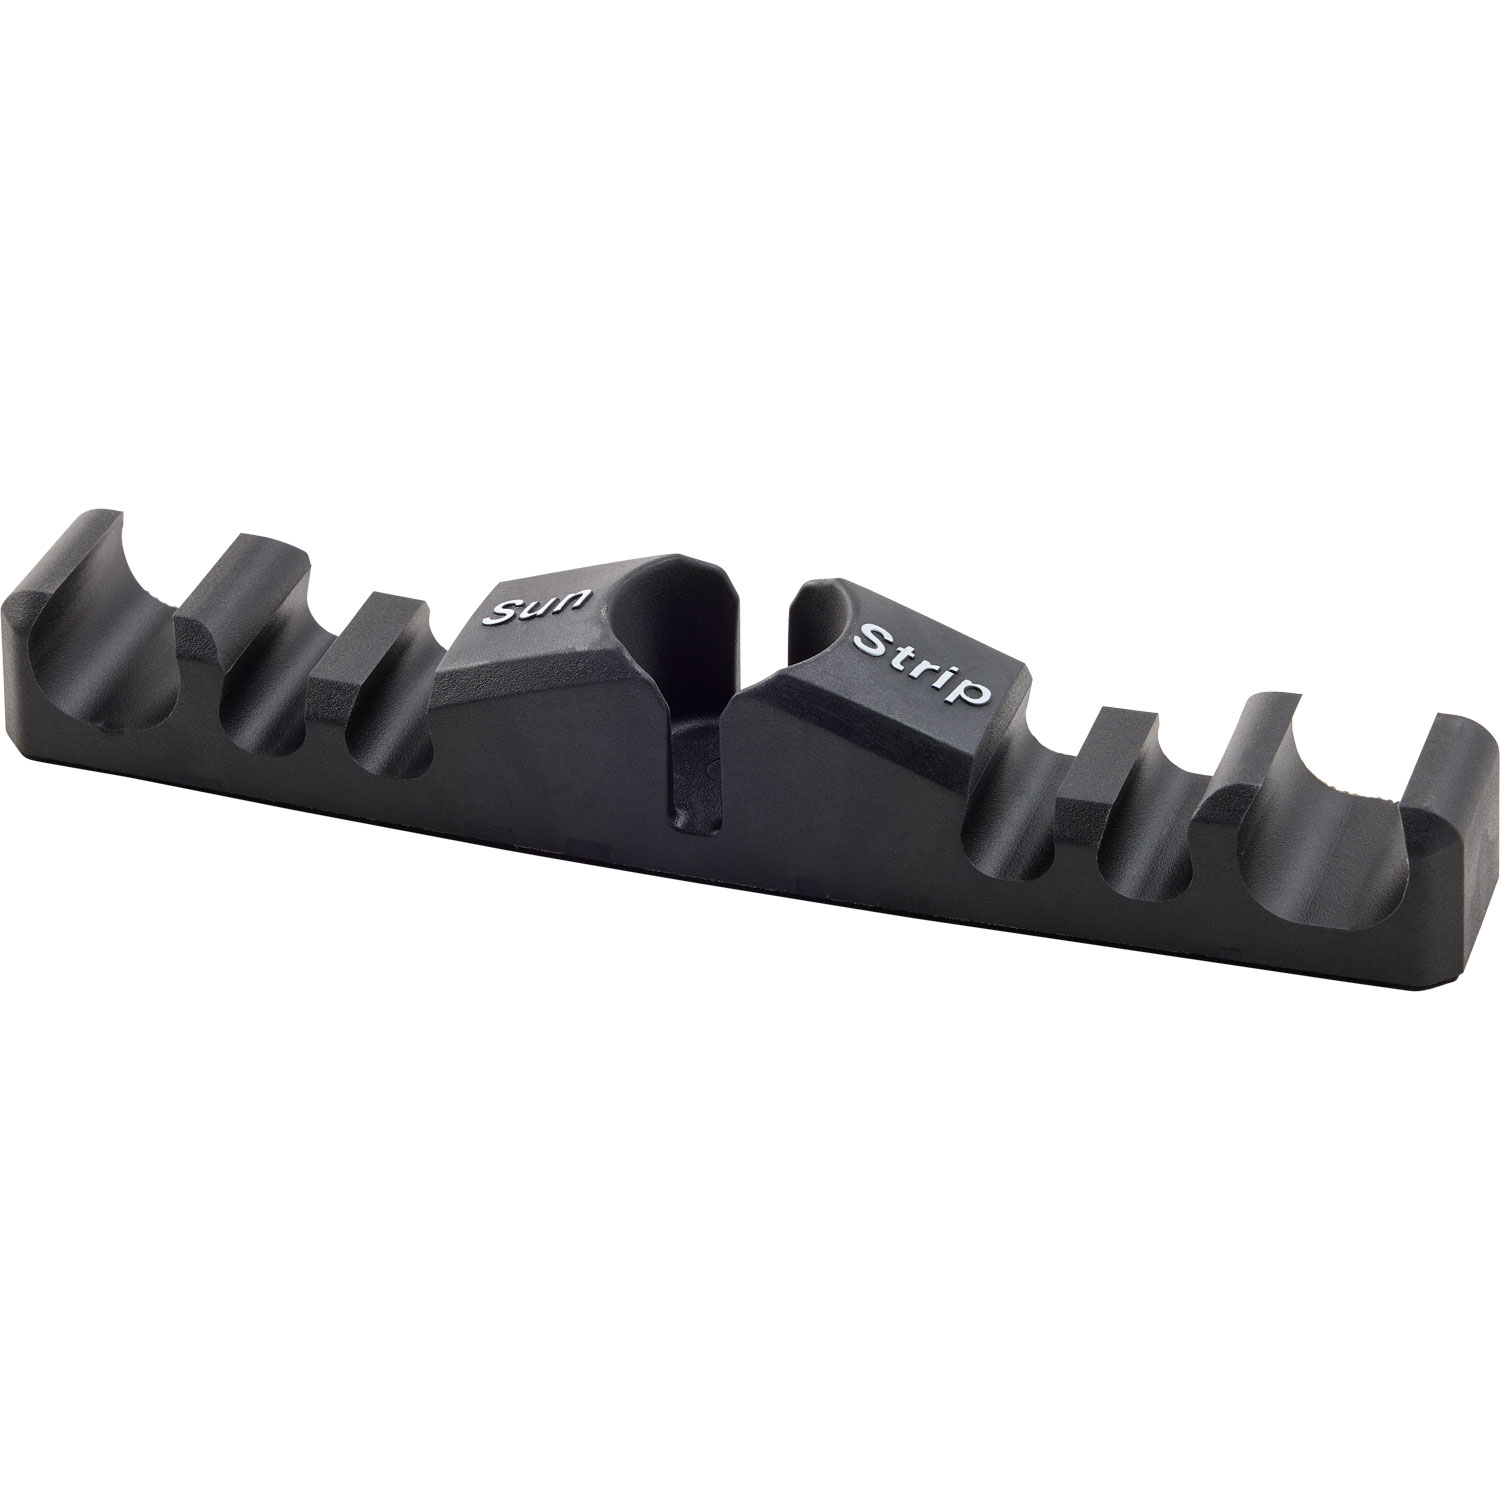 Duluth Trading Co. Rig Strips - Rod and Gun Holder